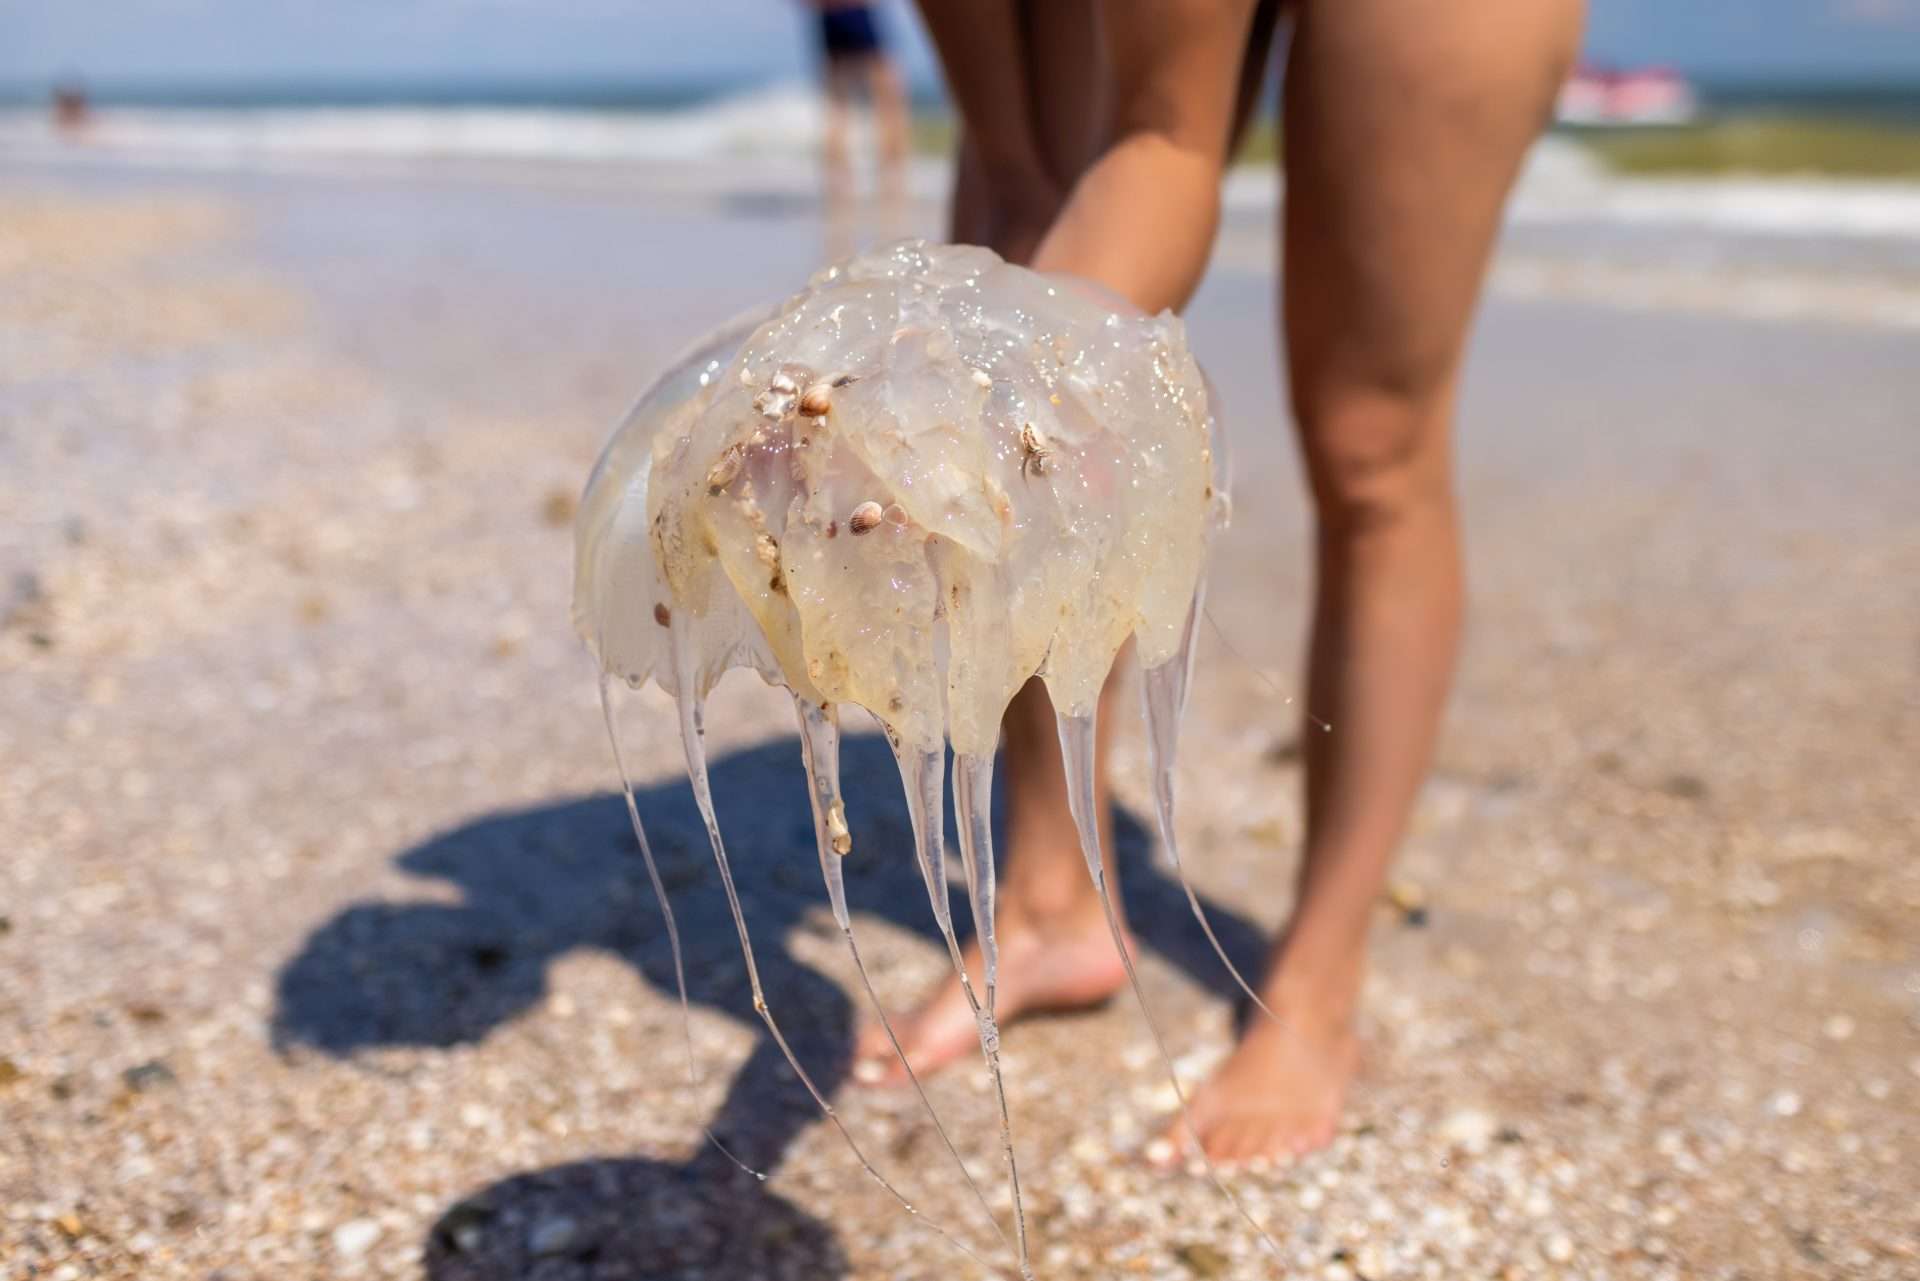 Child holding large jellyfish on the beach.